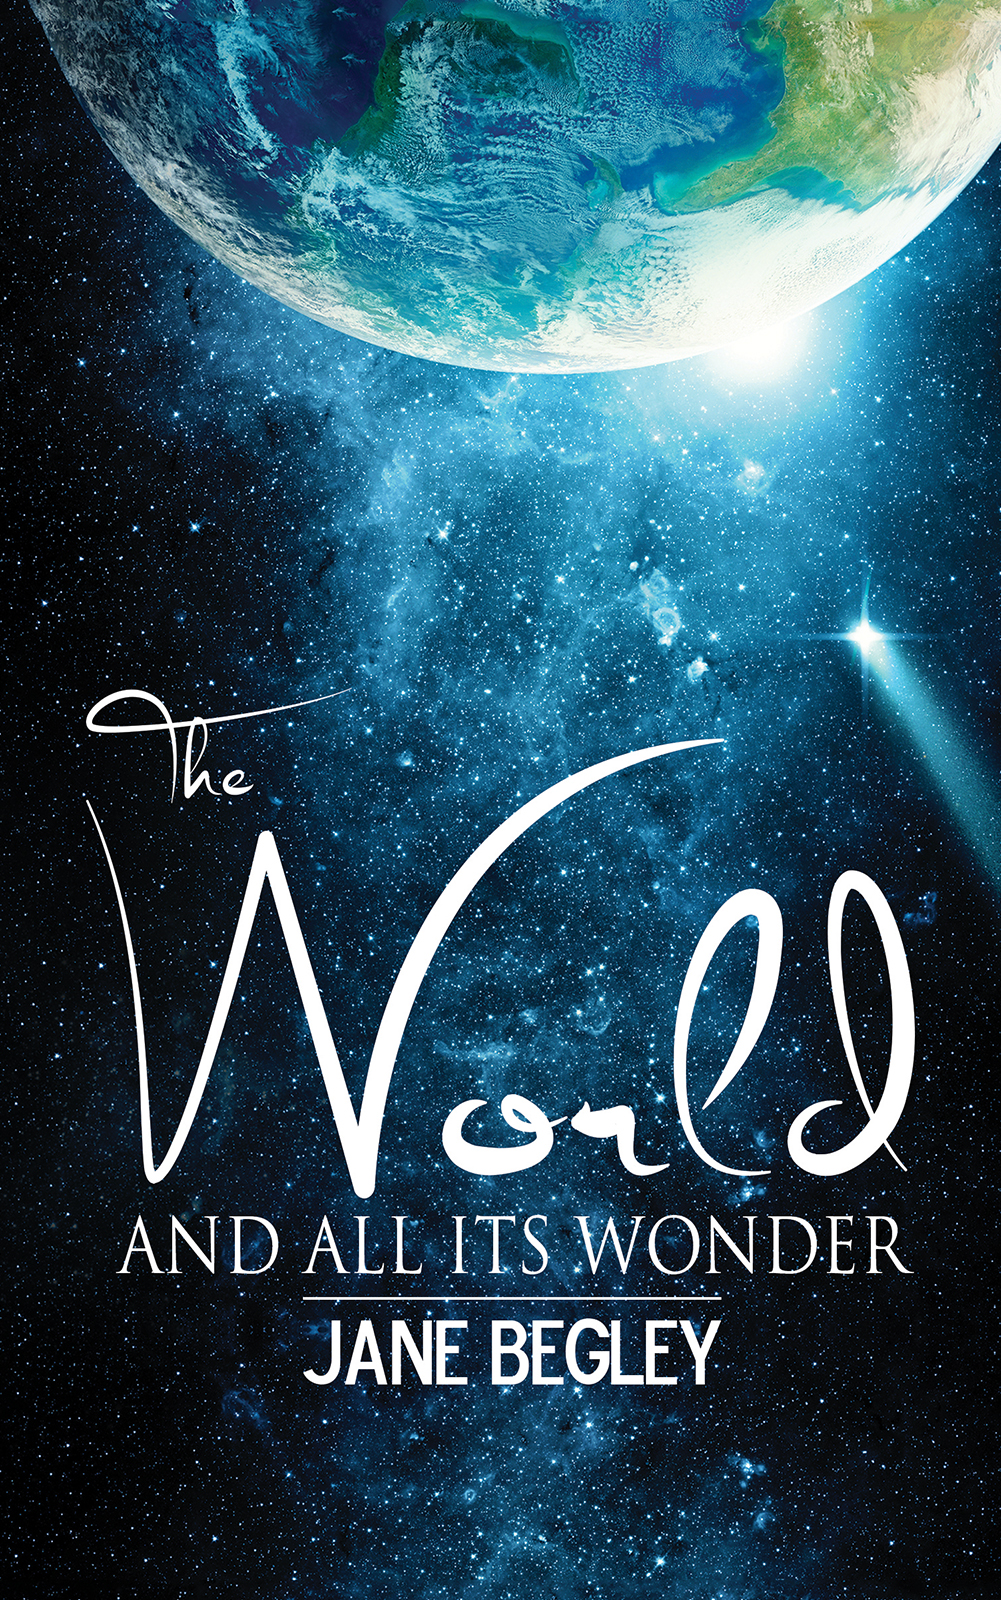 This image is the cover for the book The World and All Its Wonder